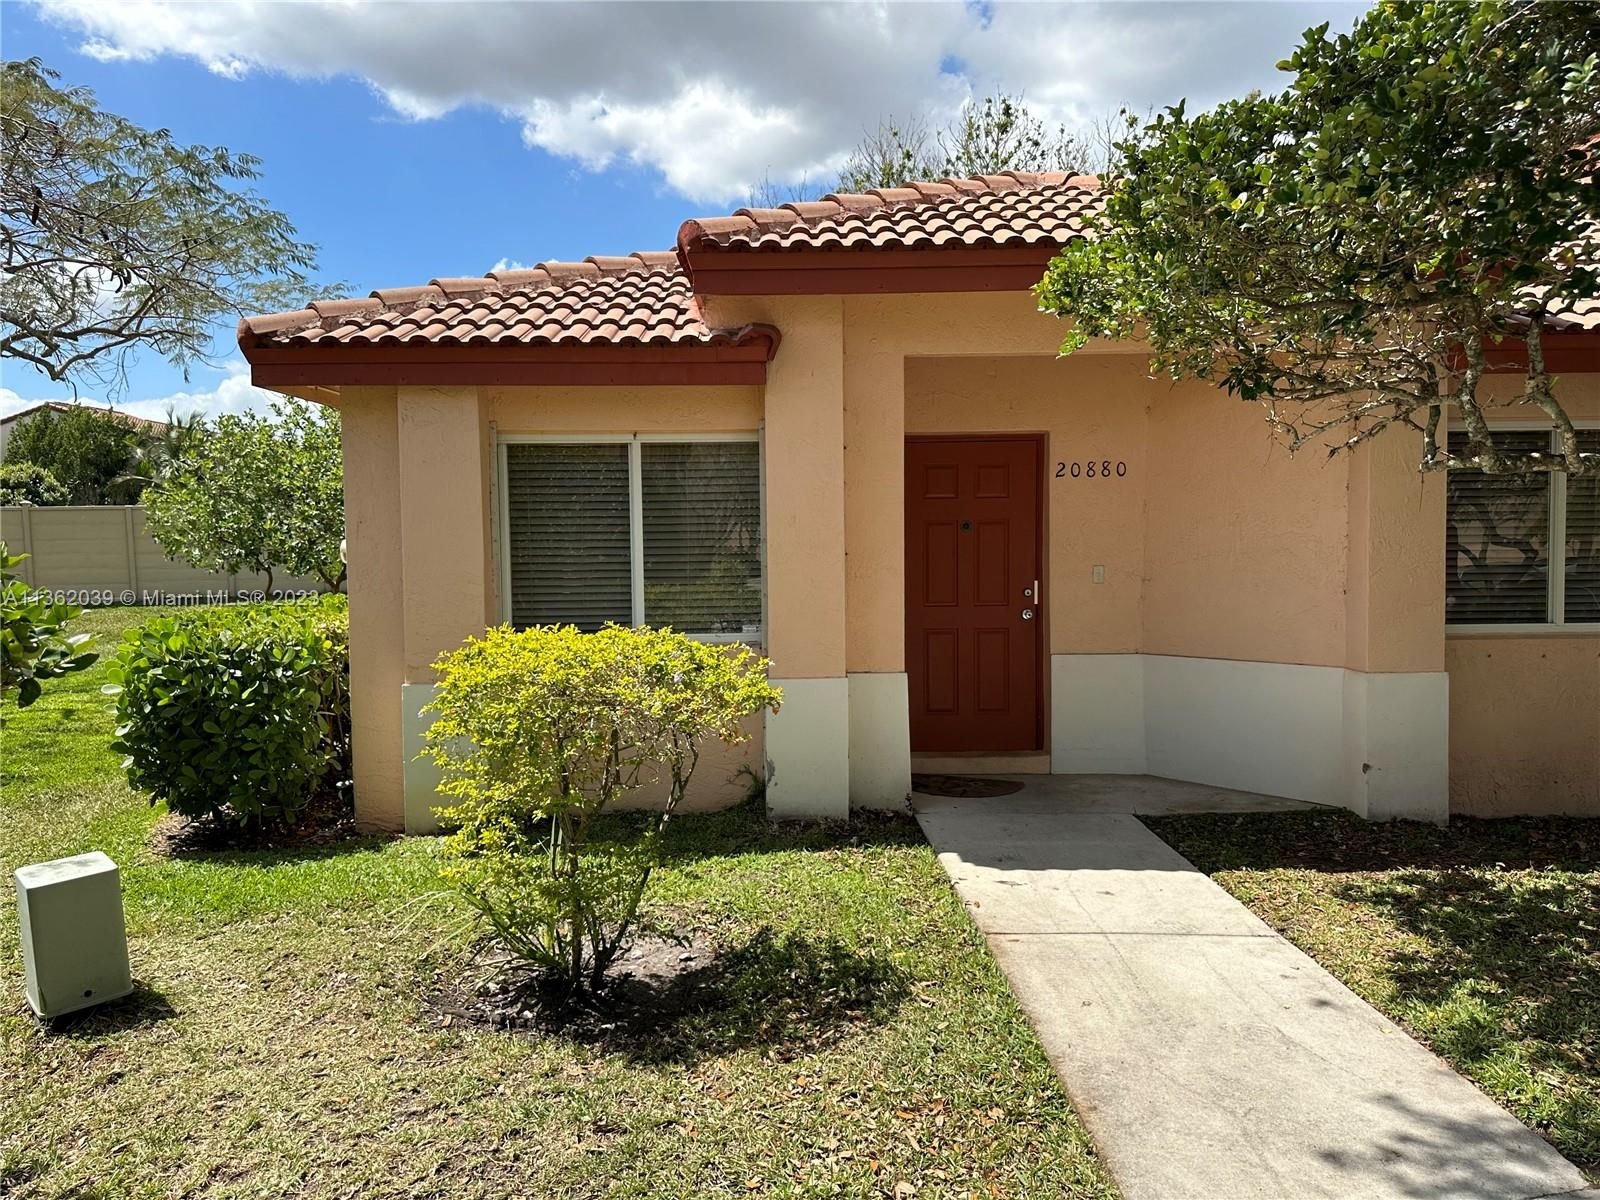 Real estate property located at 20880 3rd Ct, Broward County, Pembroke Pines, FL